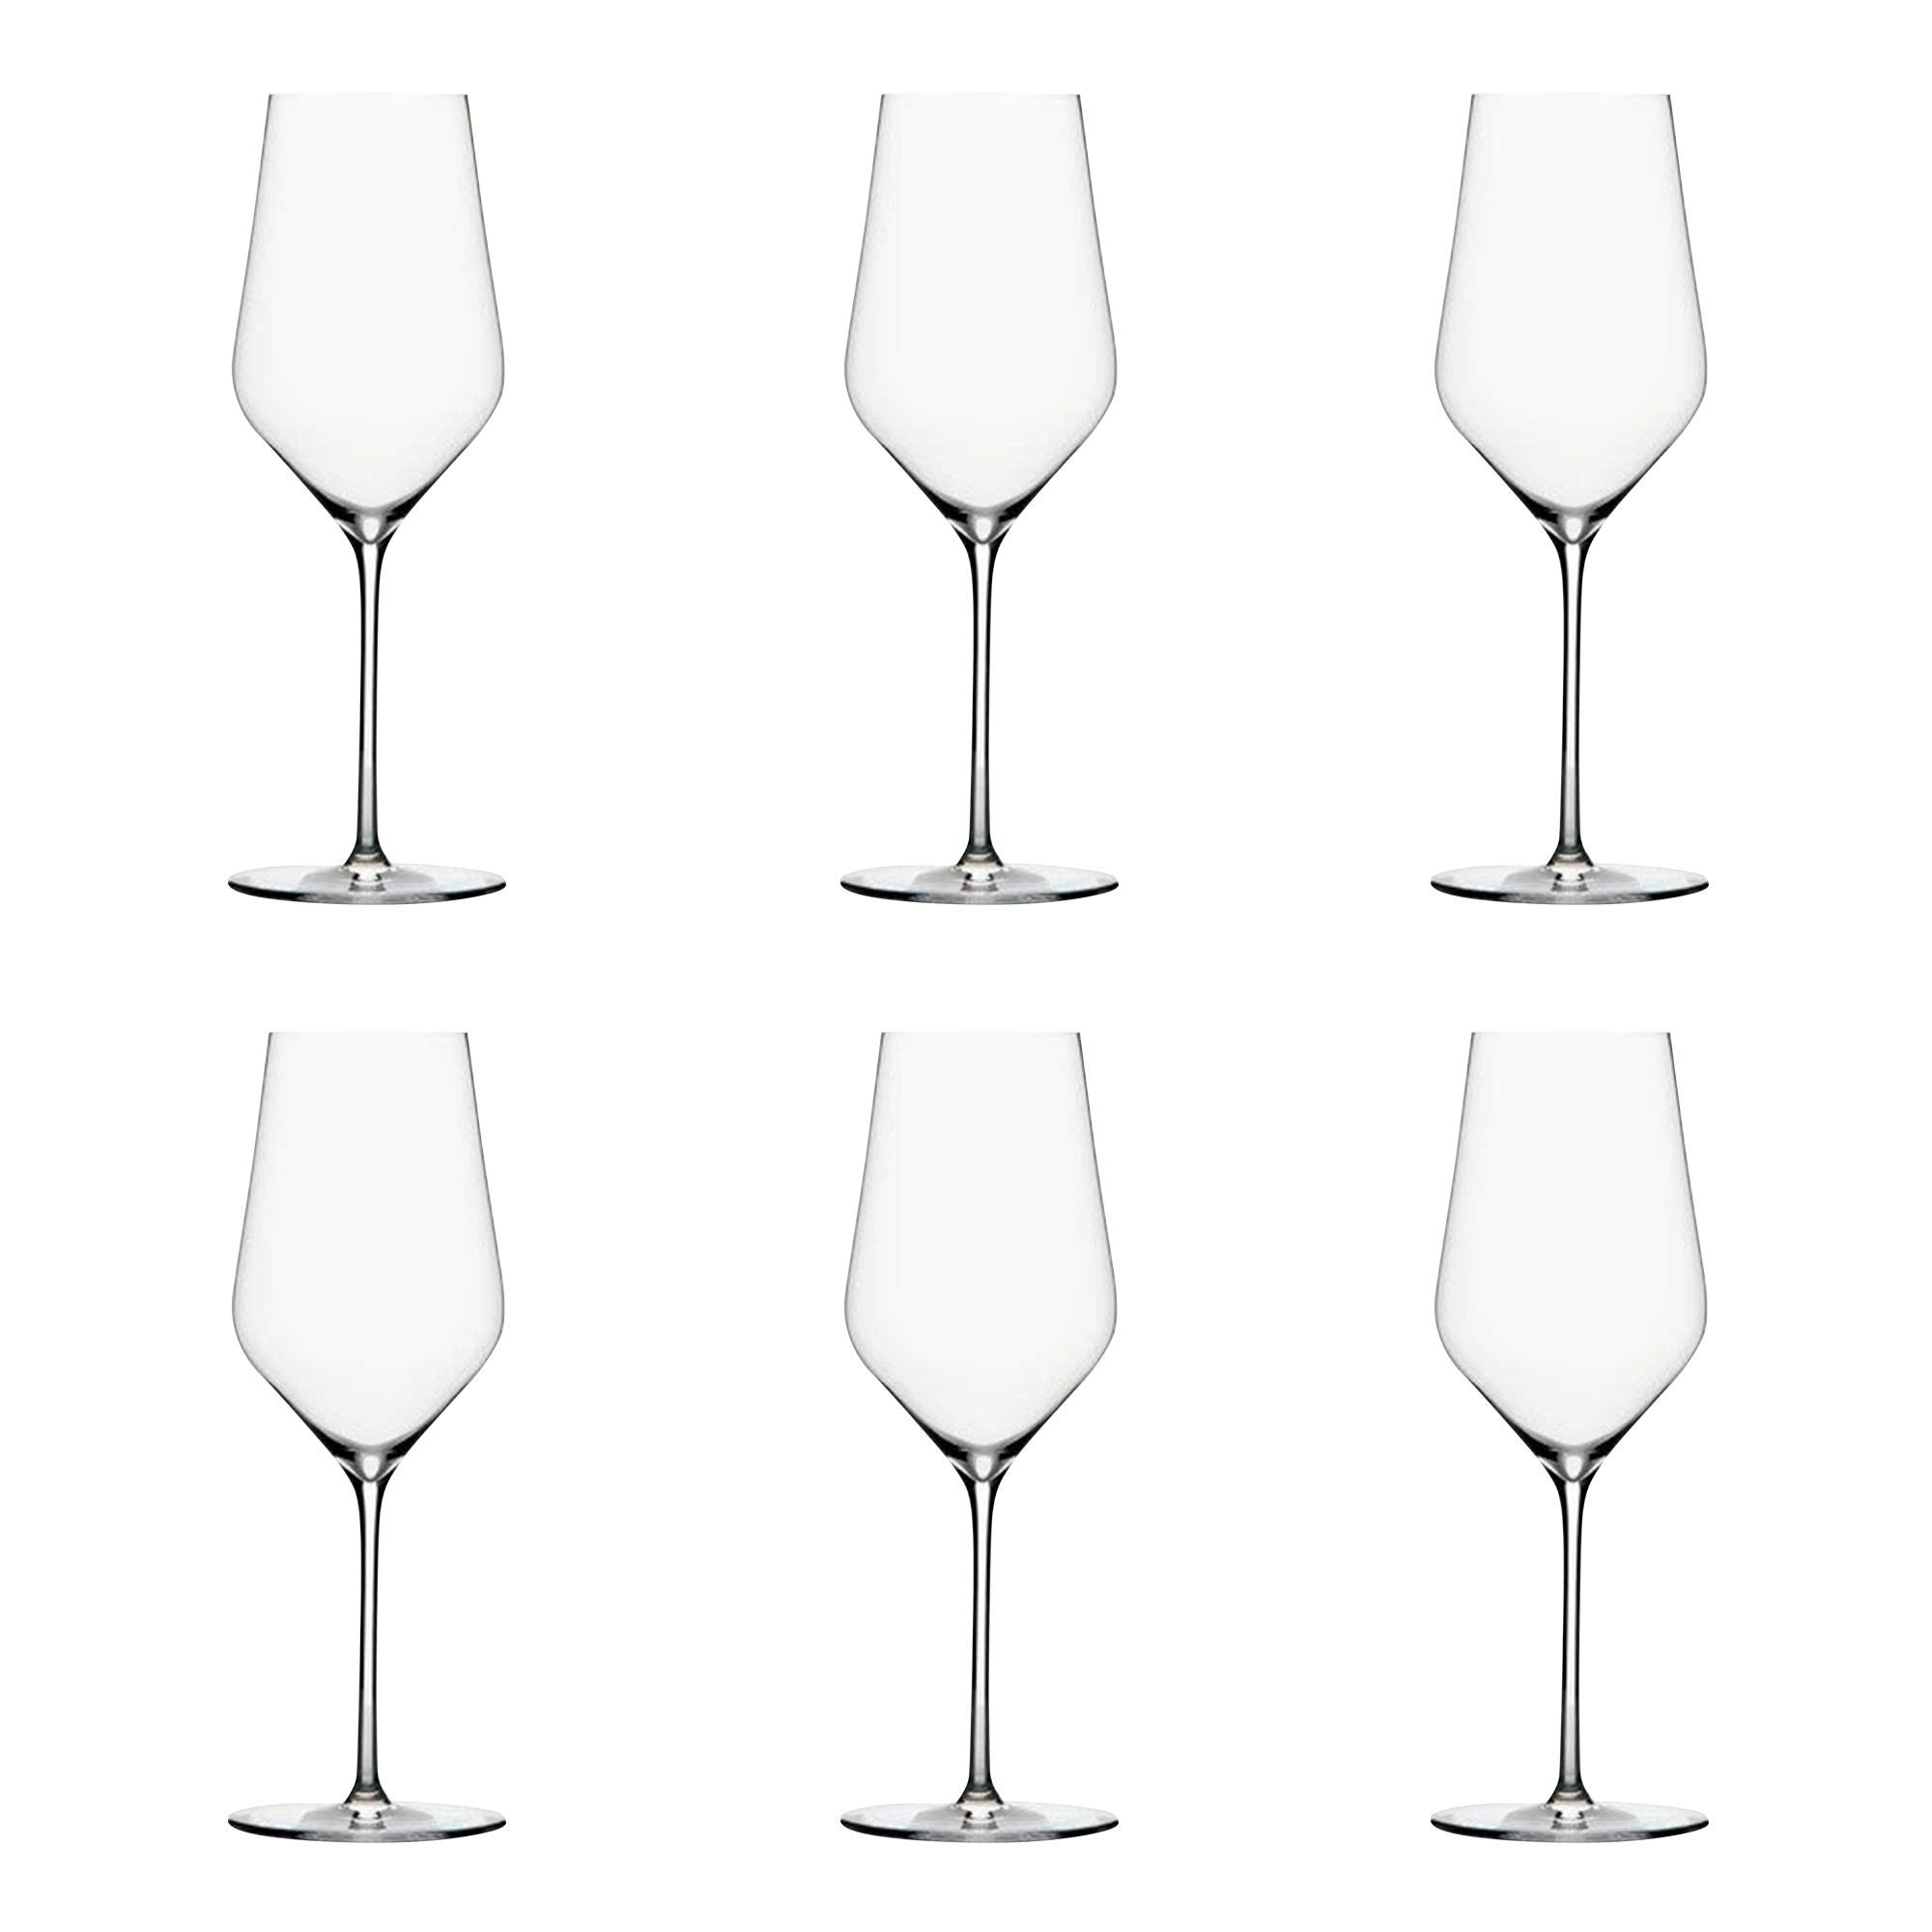 Zalto Denk'Art White Wine Glass made from Lead-Free Crystal | Boxed Set of 6